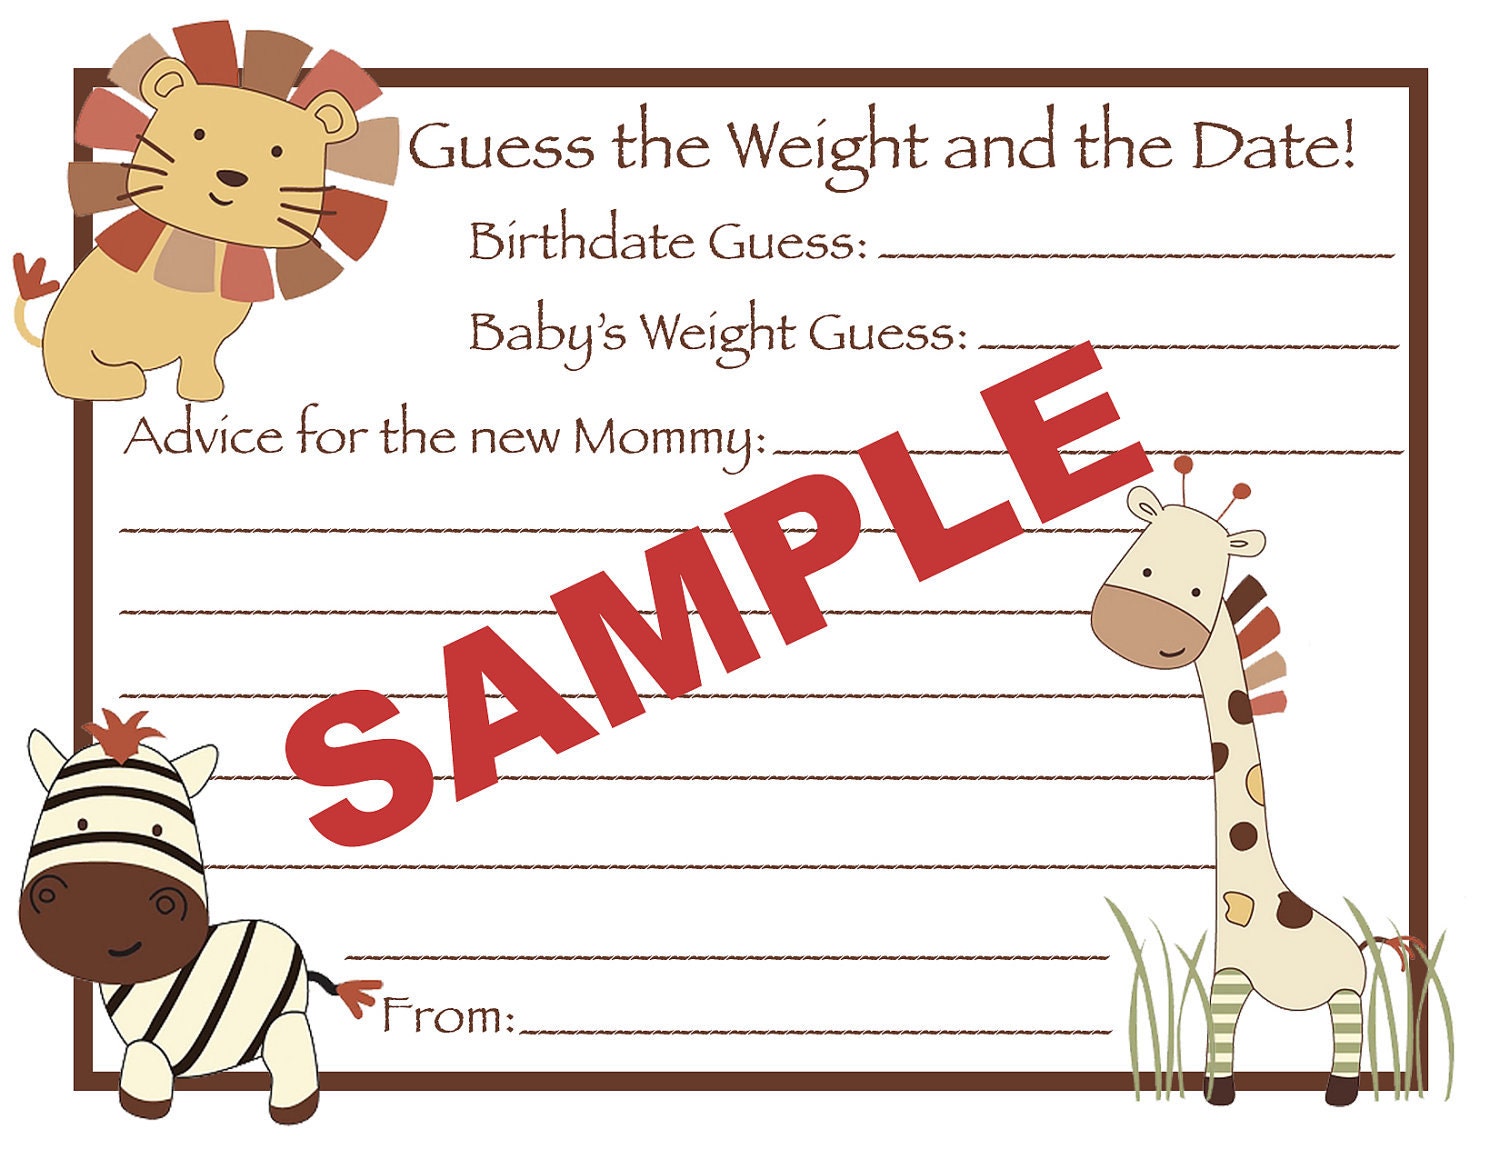 983 New baby shower game guess the weight 276 24 Printed CoCaLo Nali Jungle Baby Shower Guess by BDesigns4You 